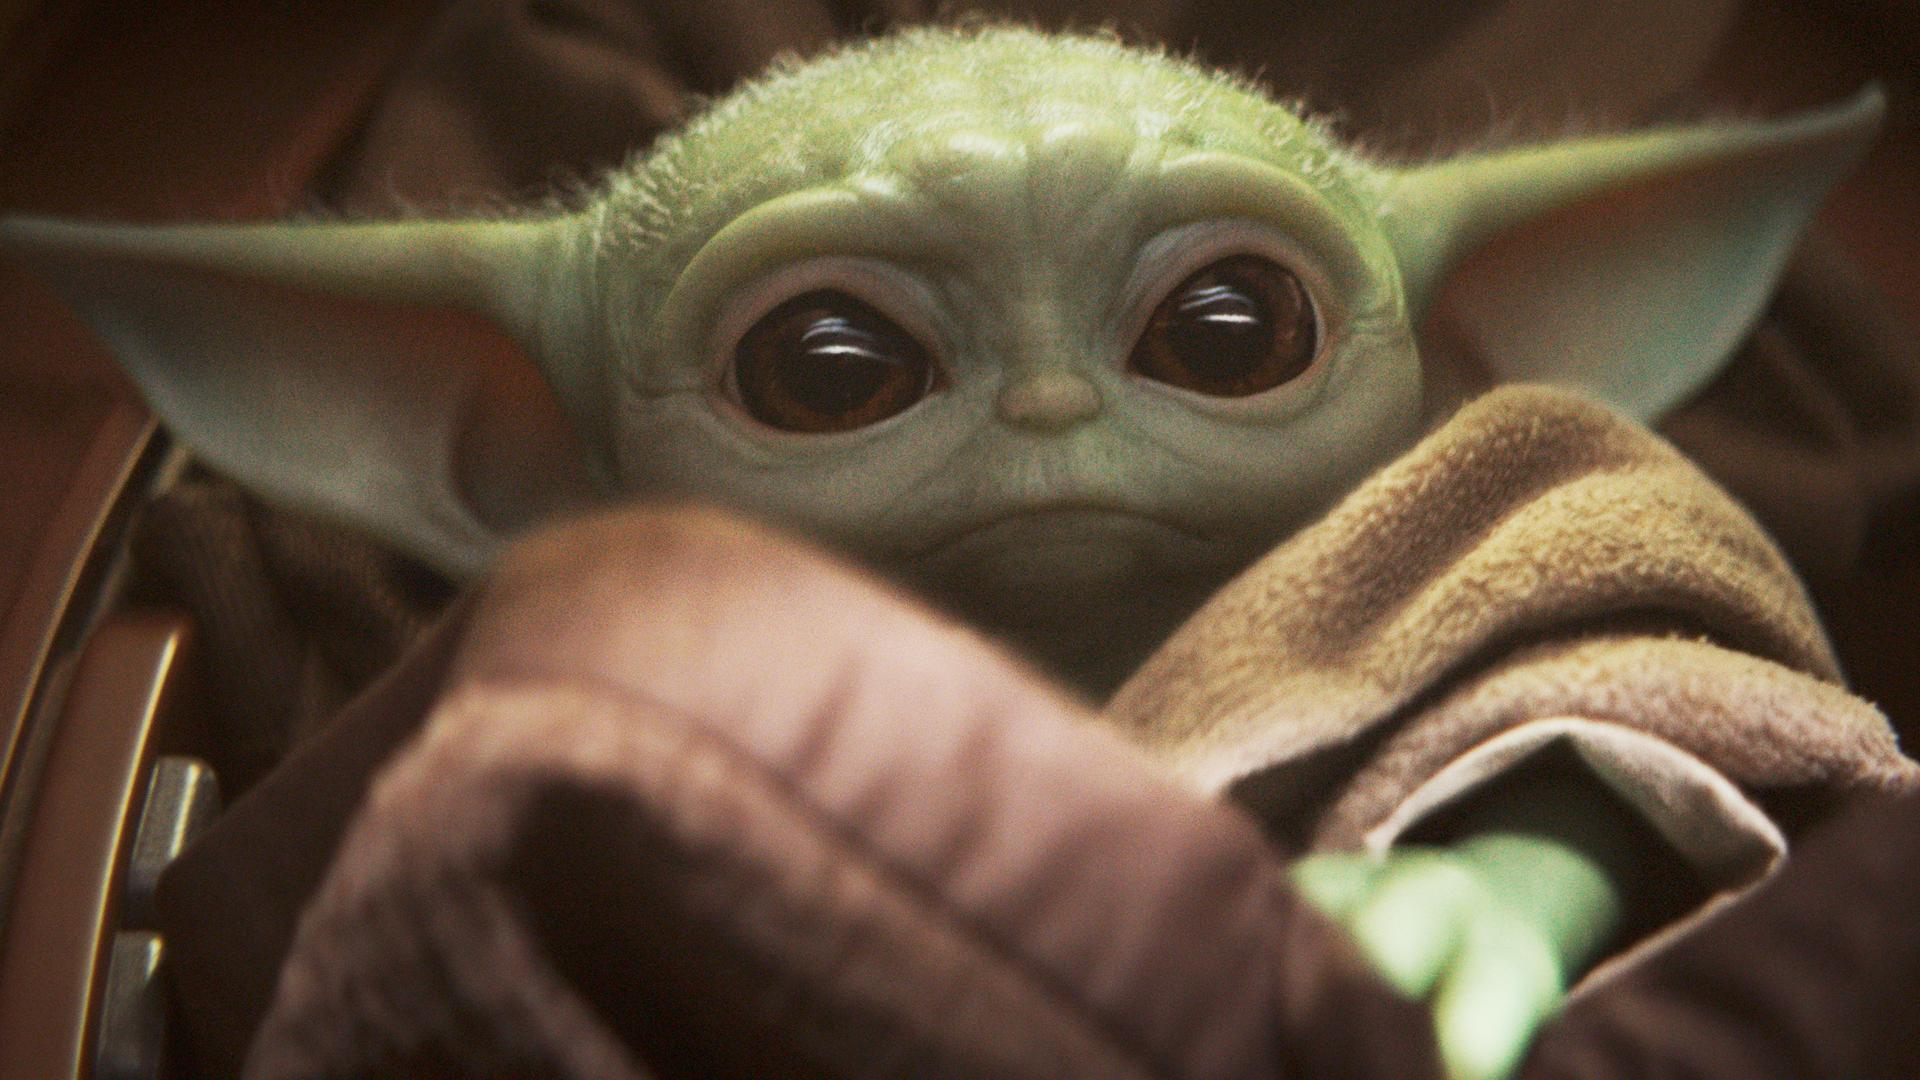 Baby Yoda GIFs, Memes Restored by Giphy After Copyright